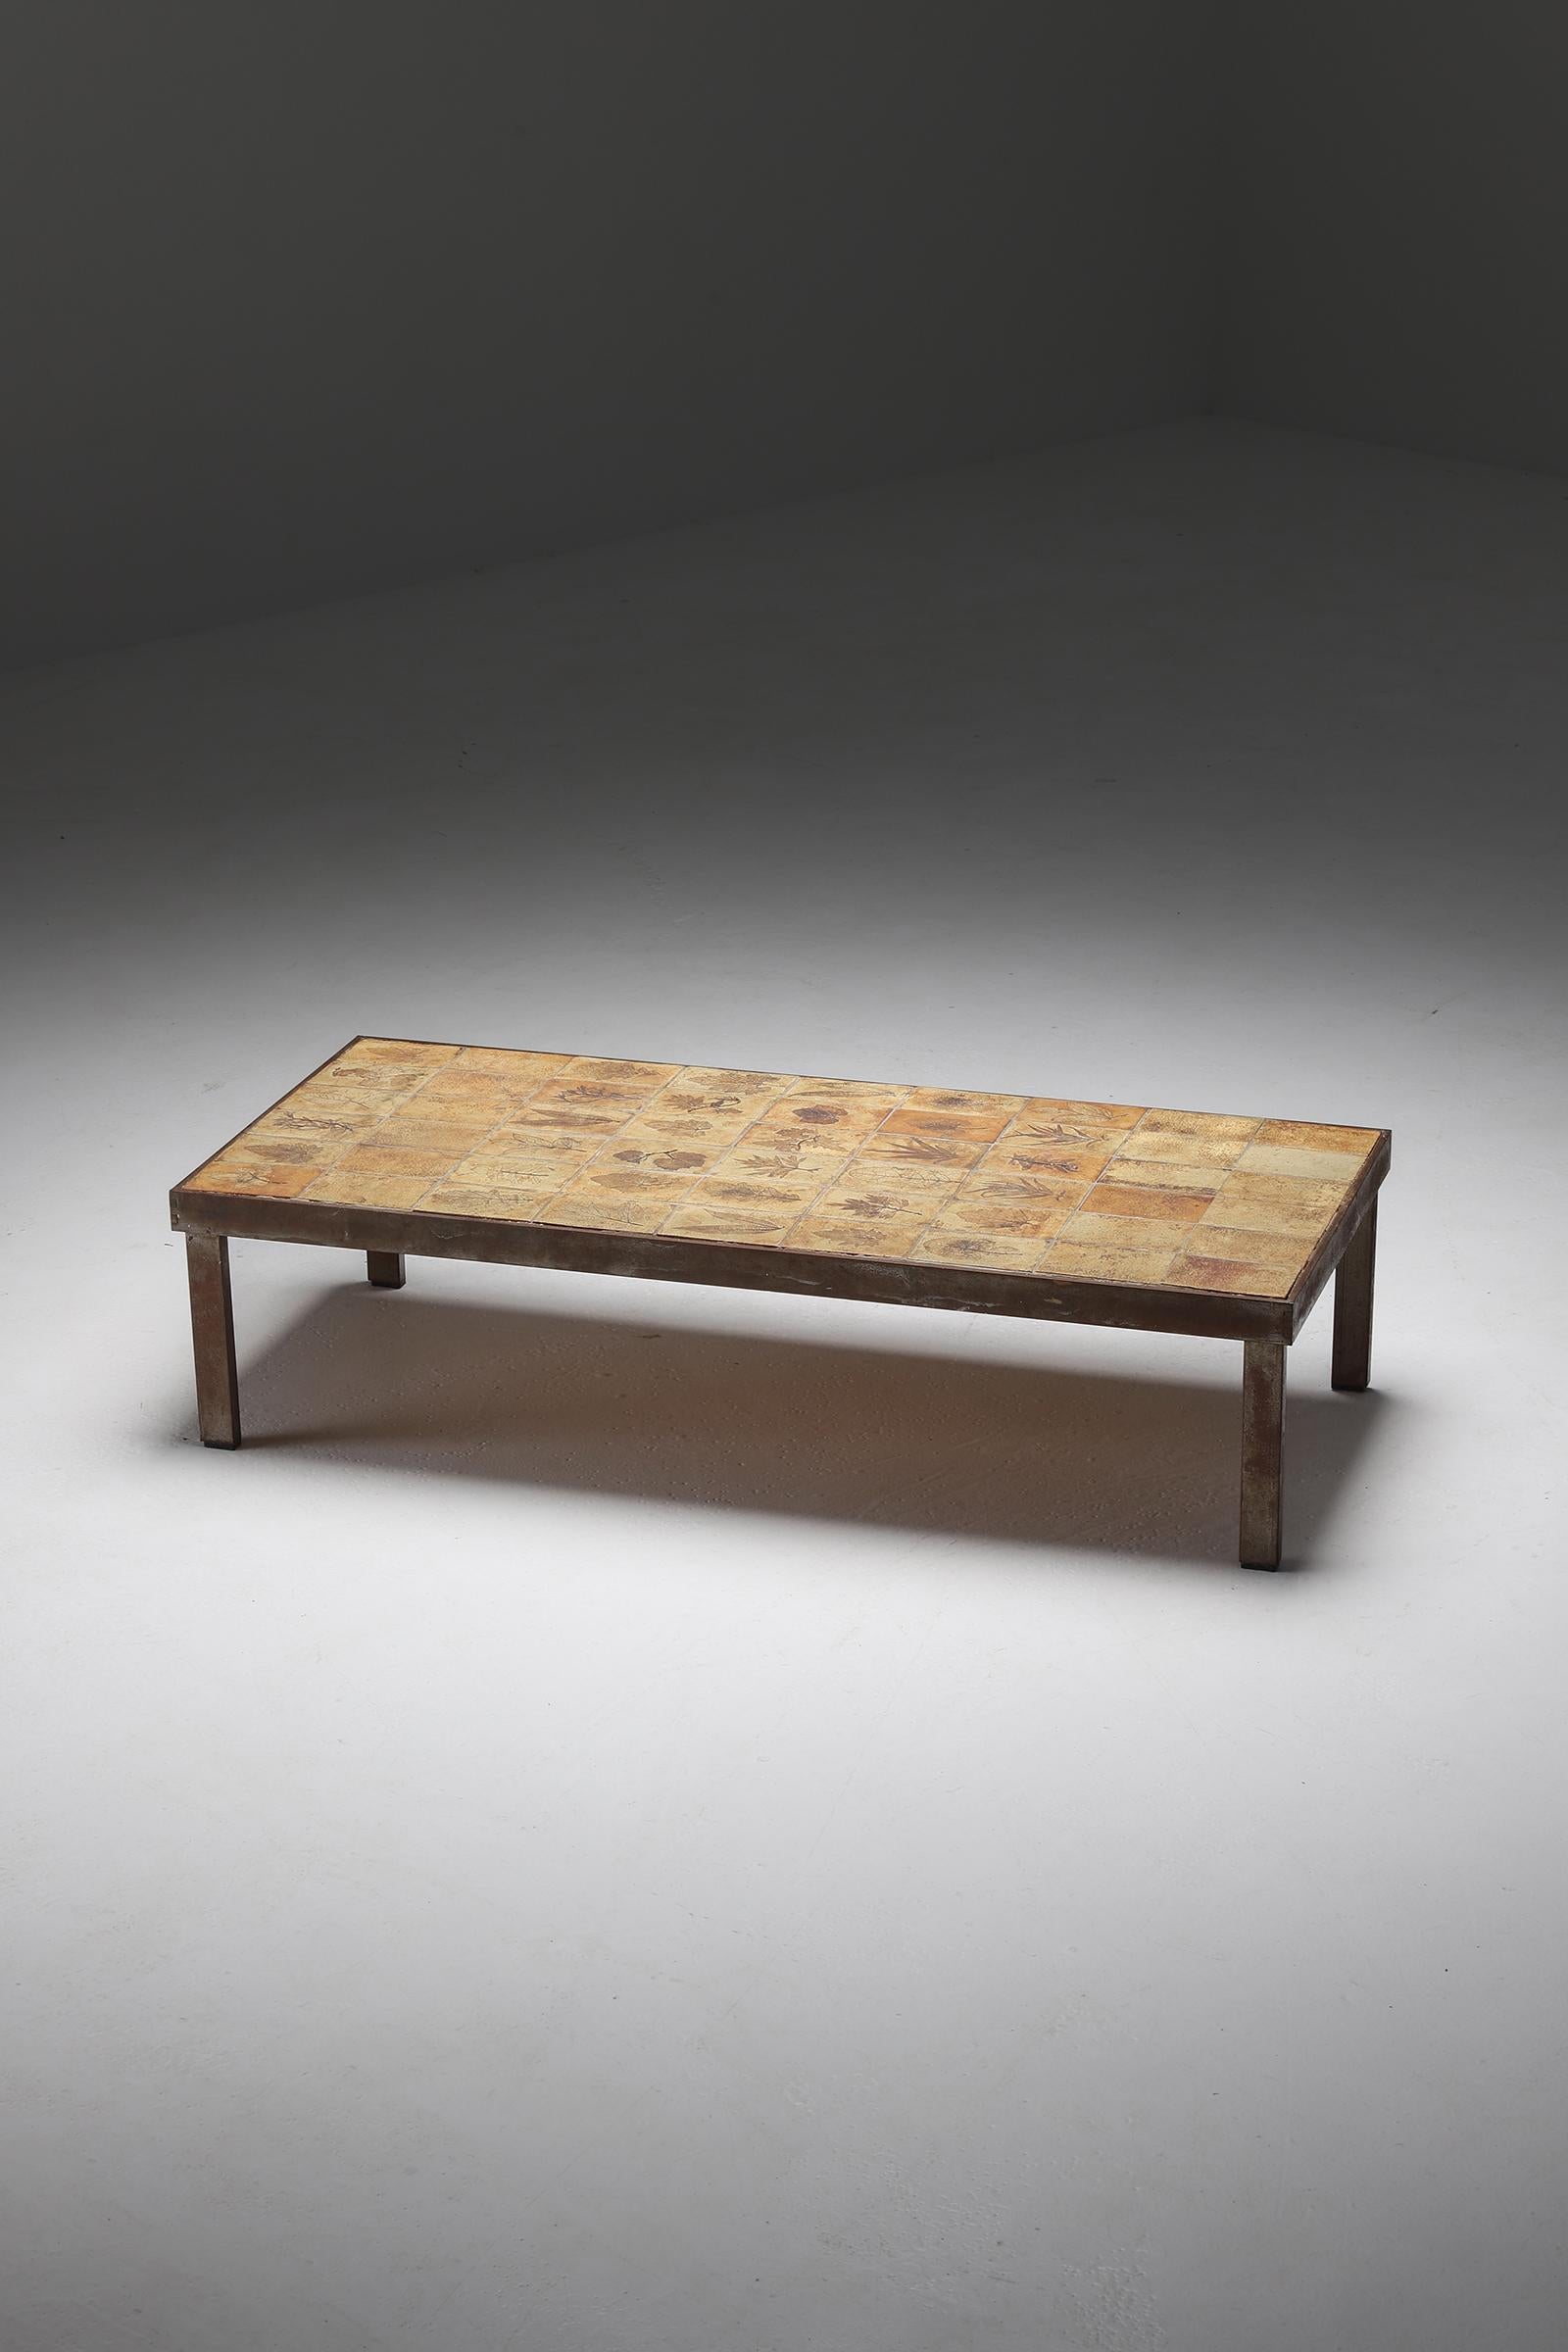 Rectangular Garrigue coffee table by Roger Capron dating from the 1960s, Vallauris, France. The table has a metal structure and legs with a ceramic top with inlaid herbarium motifs. The handcrafted tiles are produced by a technique in which real